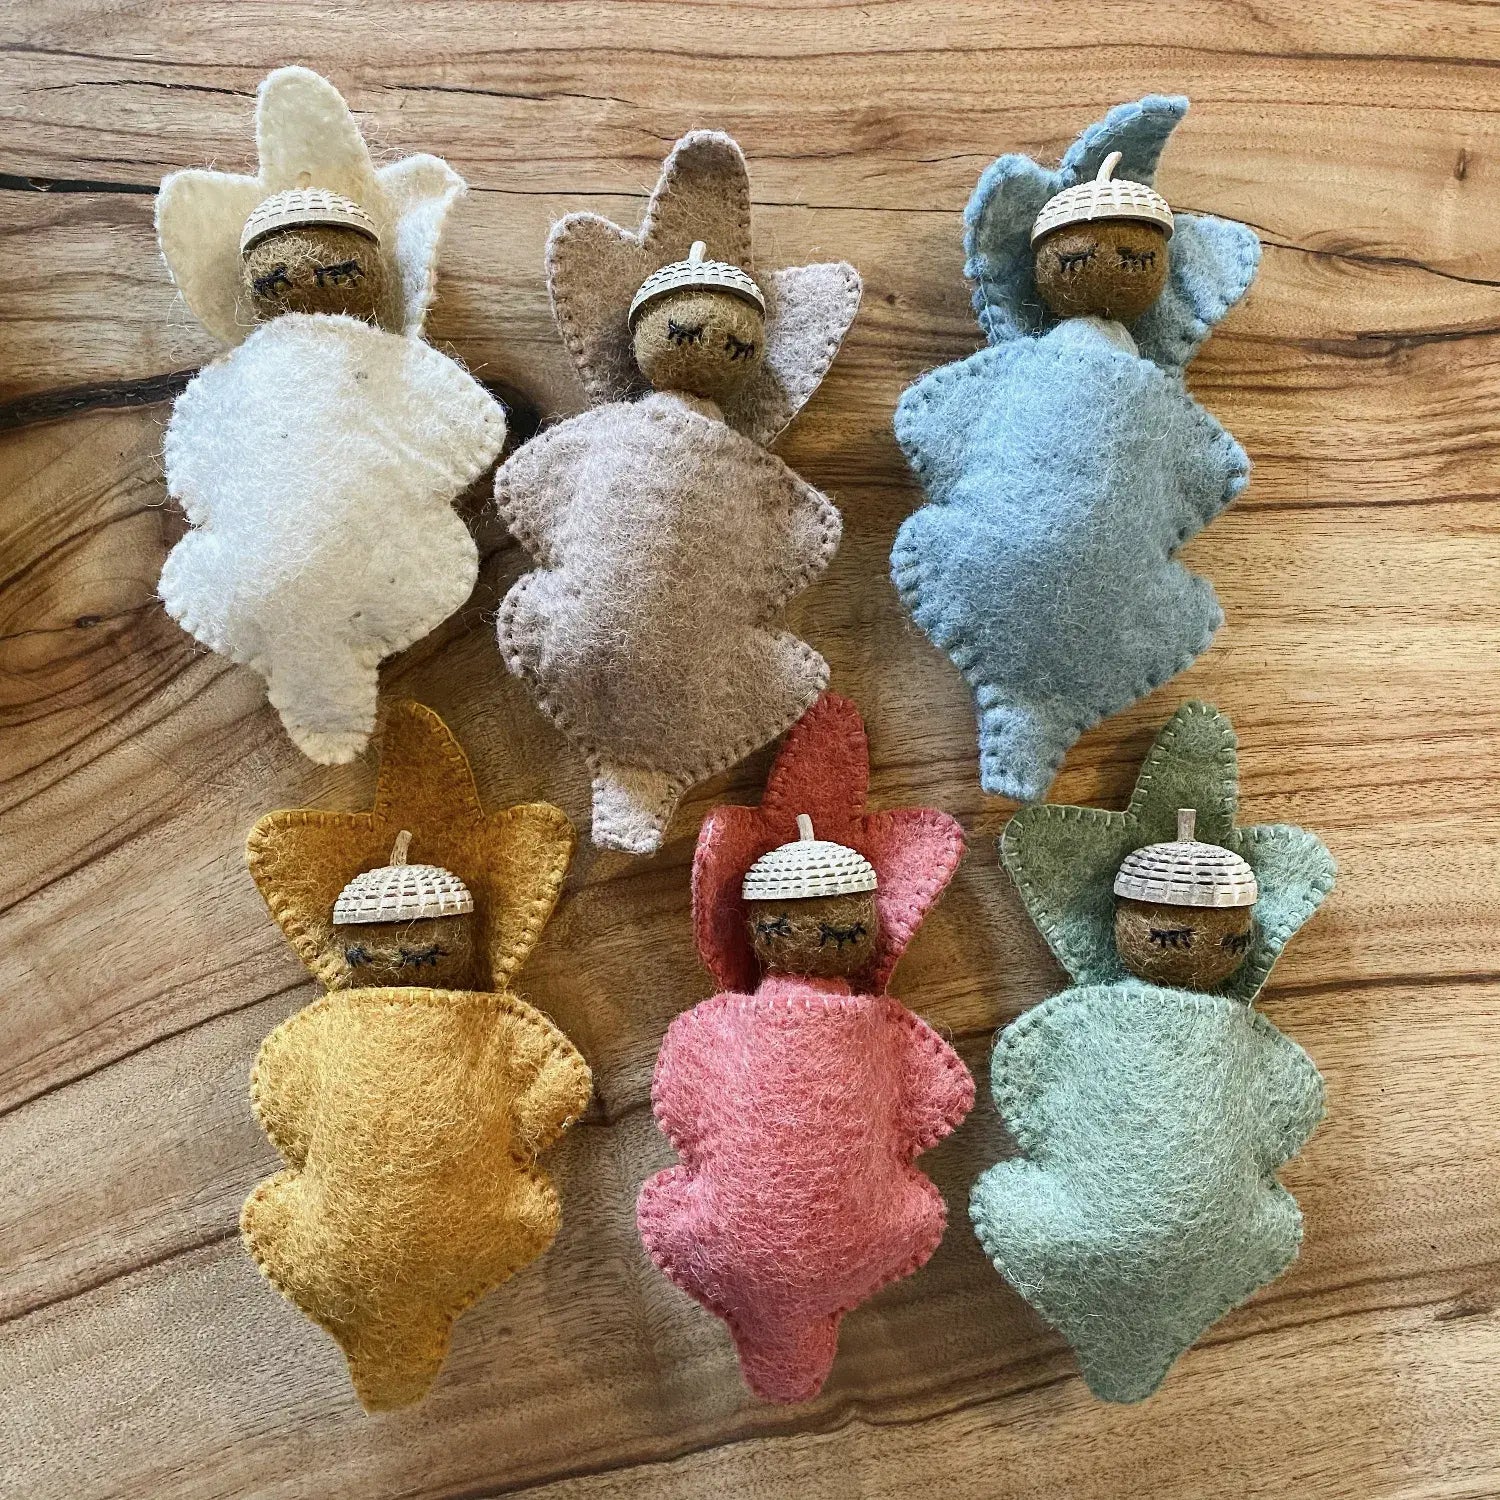 Earth Acorn Babies by Papoose ToysEarth Acorn Babies by Papoose ToysEarth Acorn Babies - Felt Worry Dolls by Papoose Toys